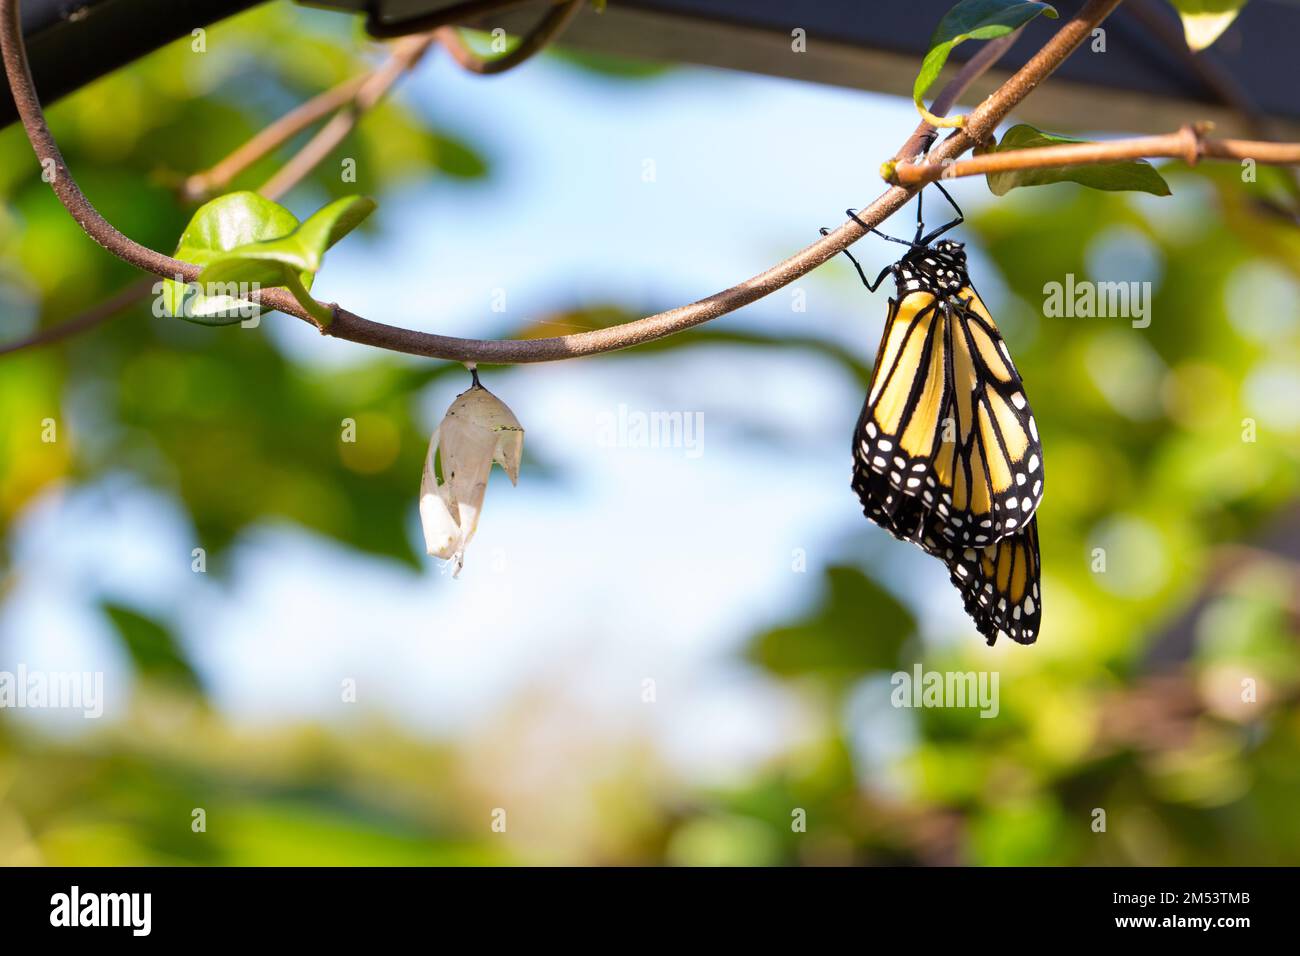 A monarch butterfly just hatched from chrysalis on a branch Stock Photo